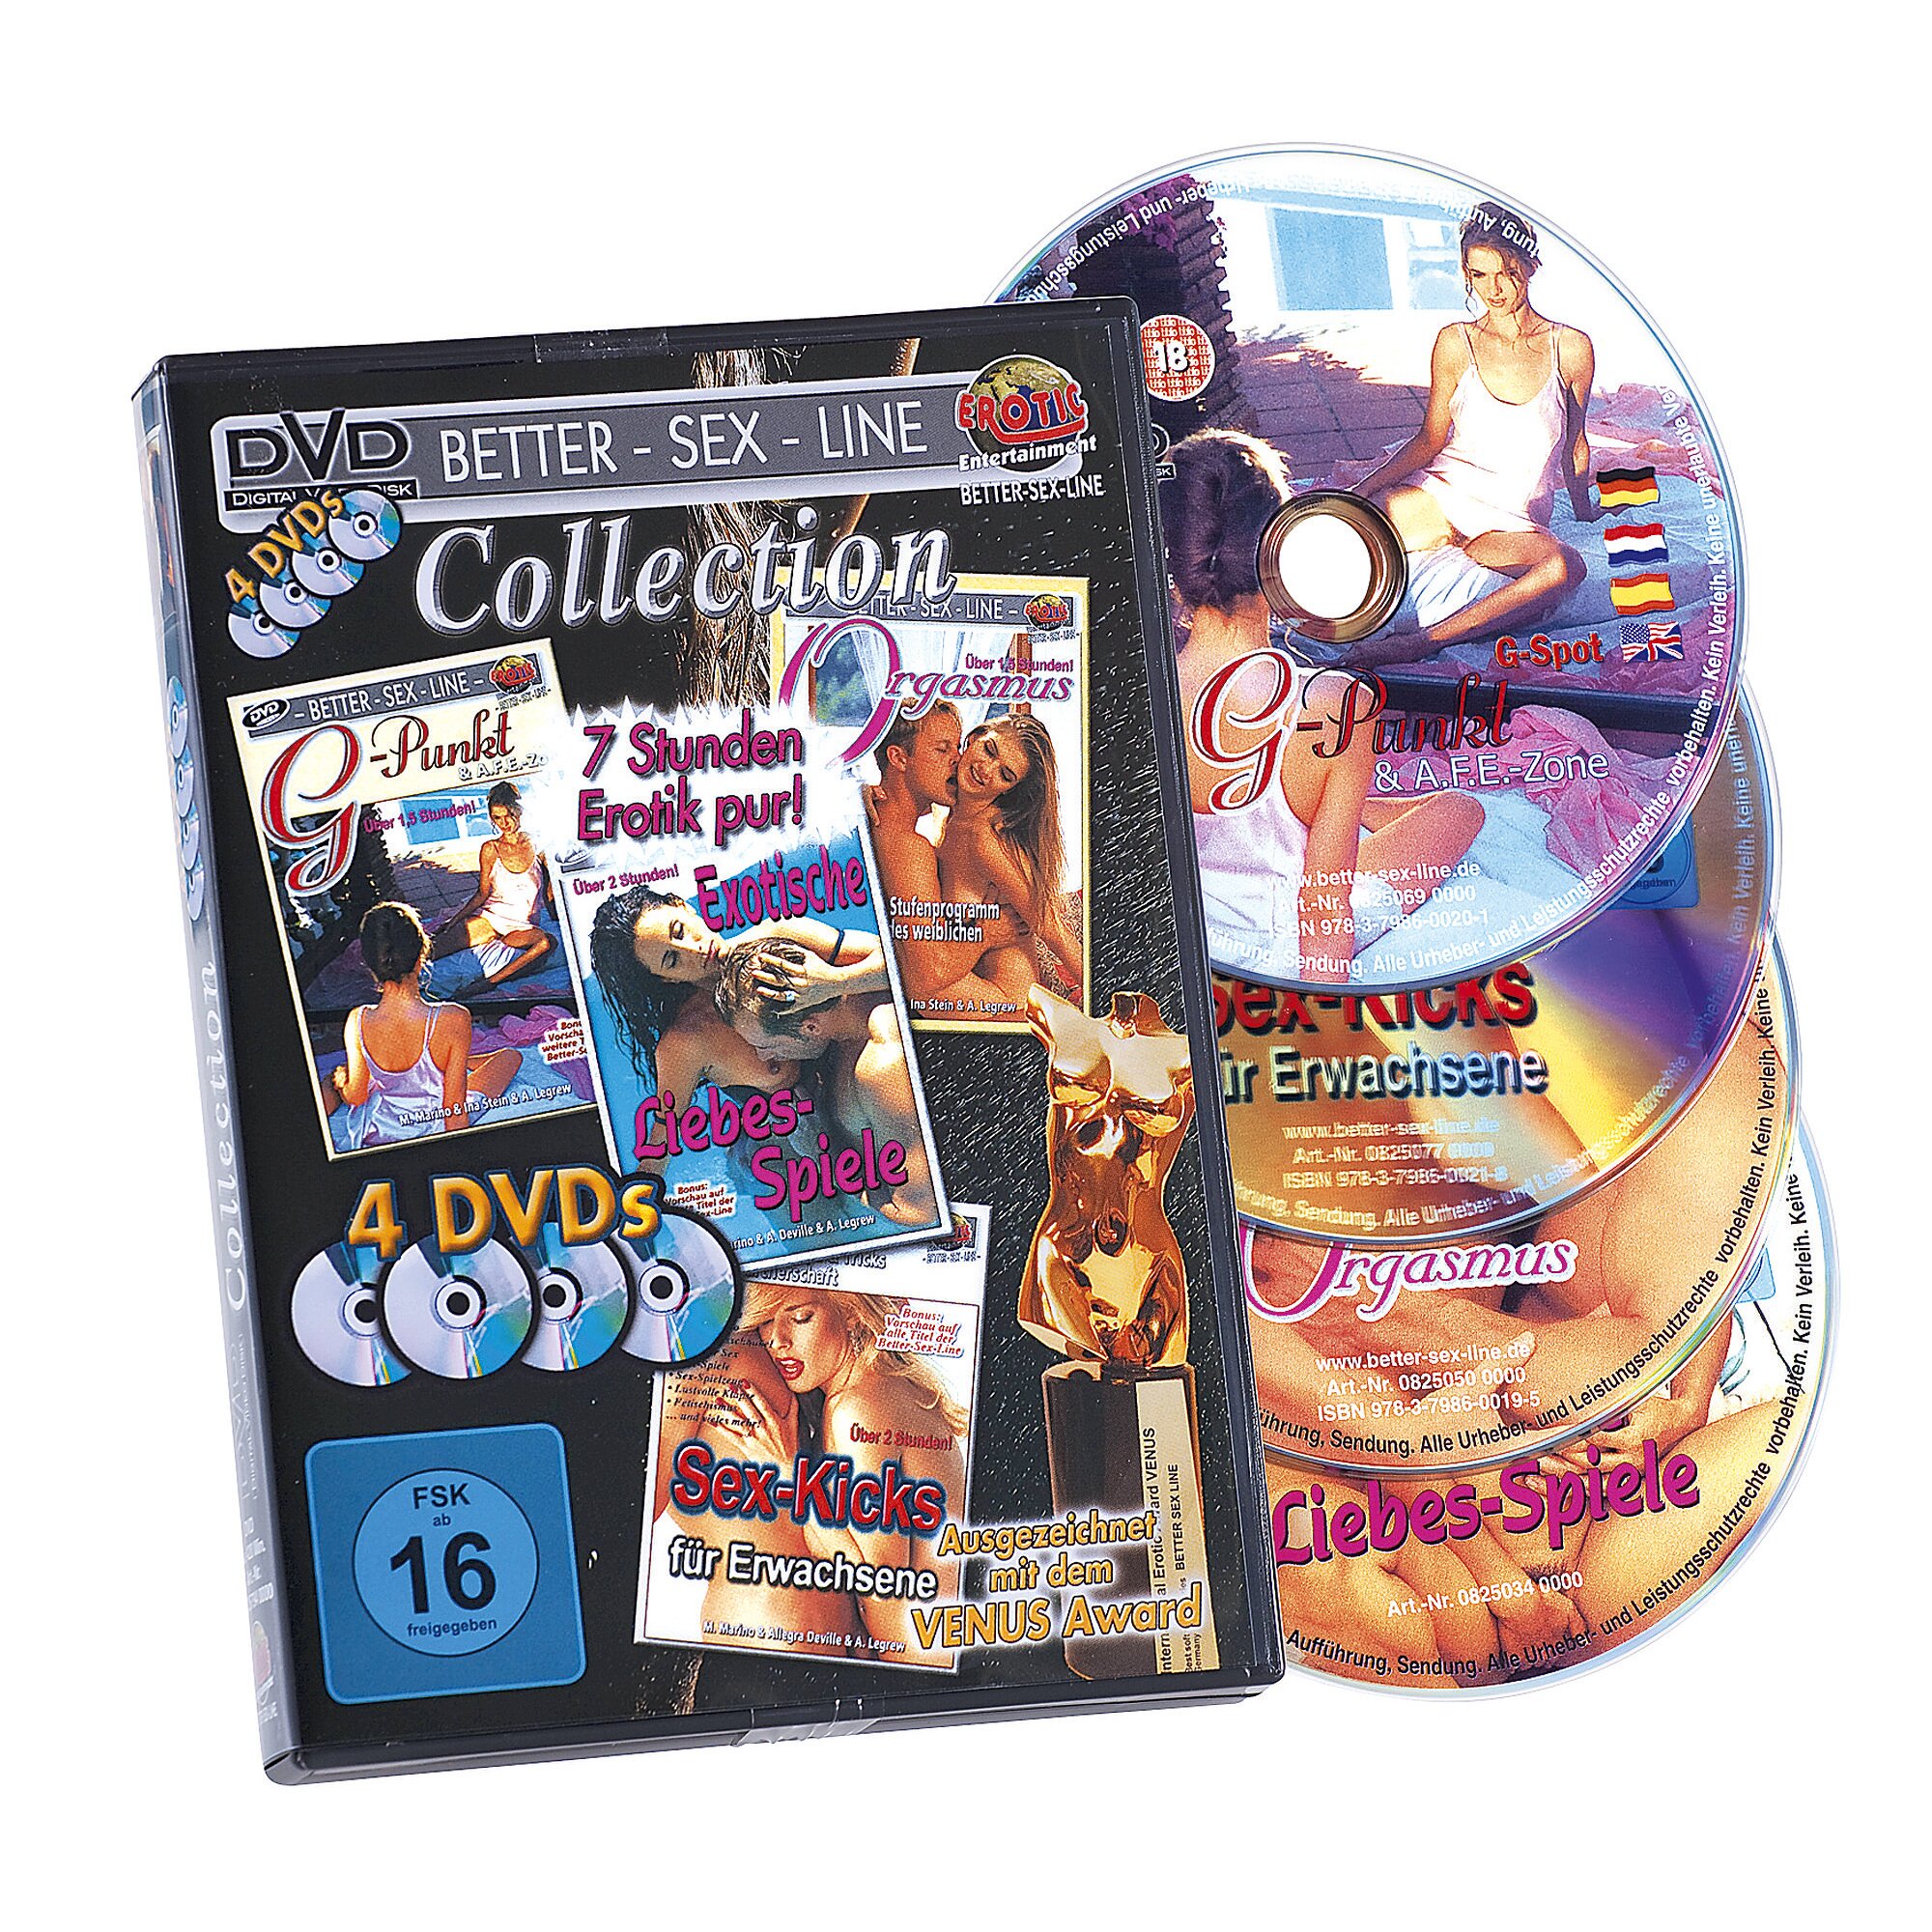 Image of DVD "4er Collection"